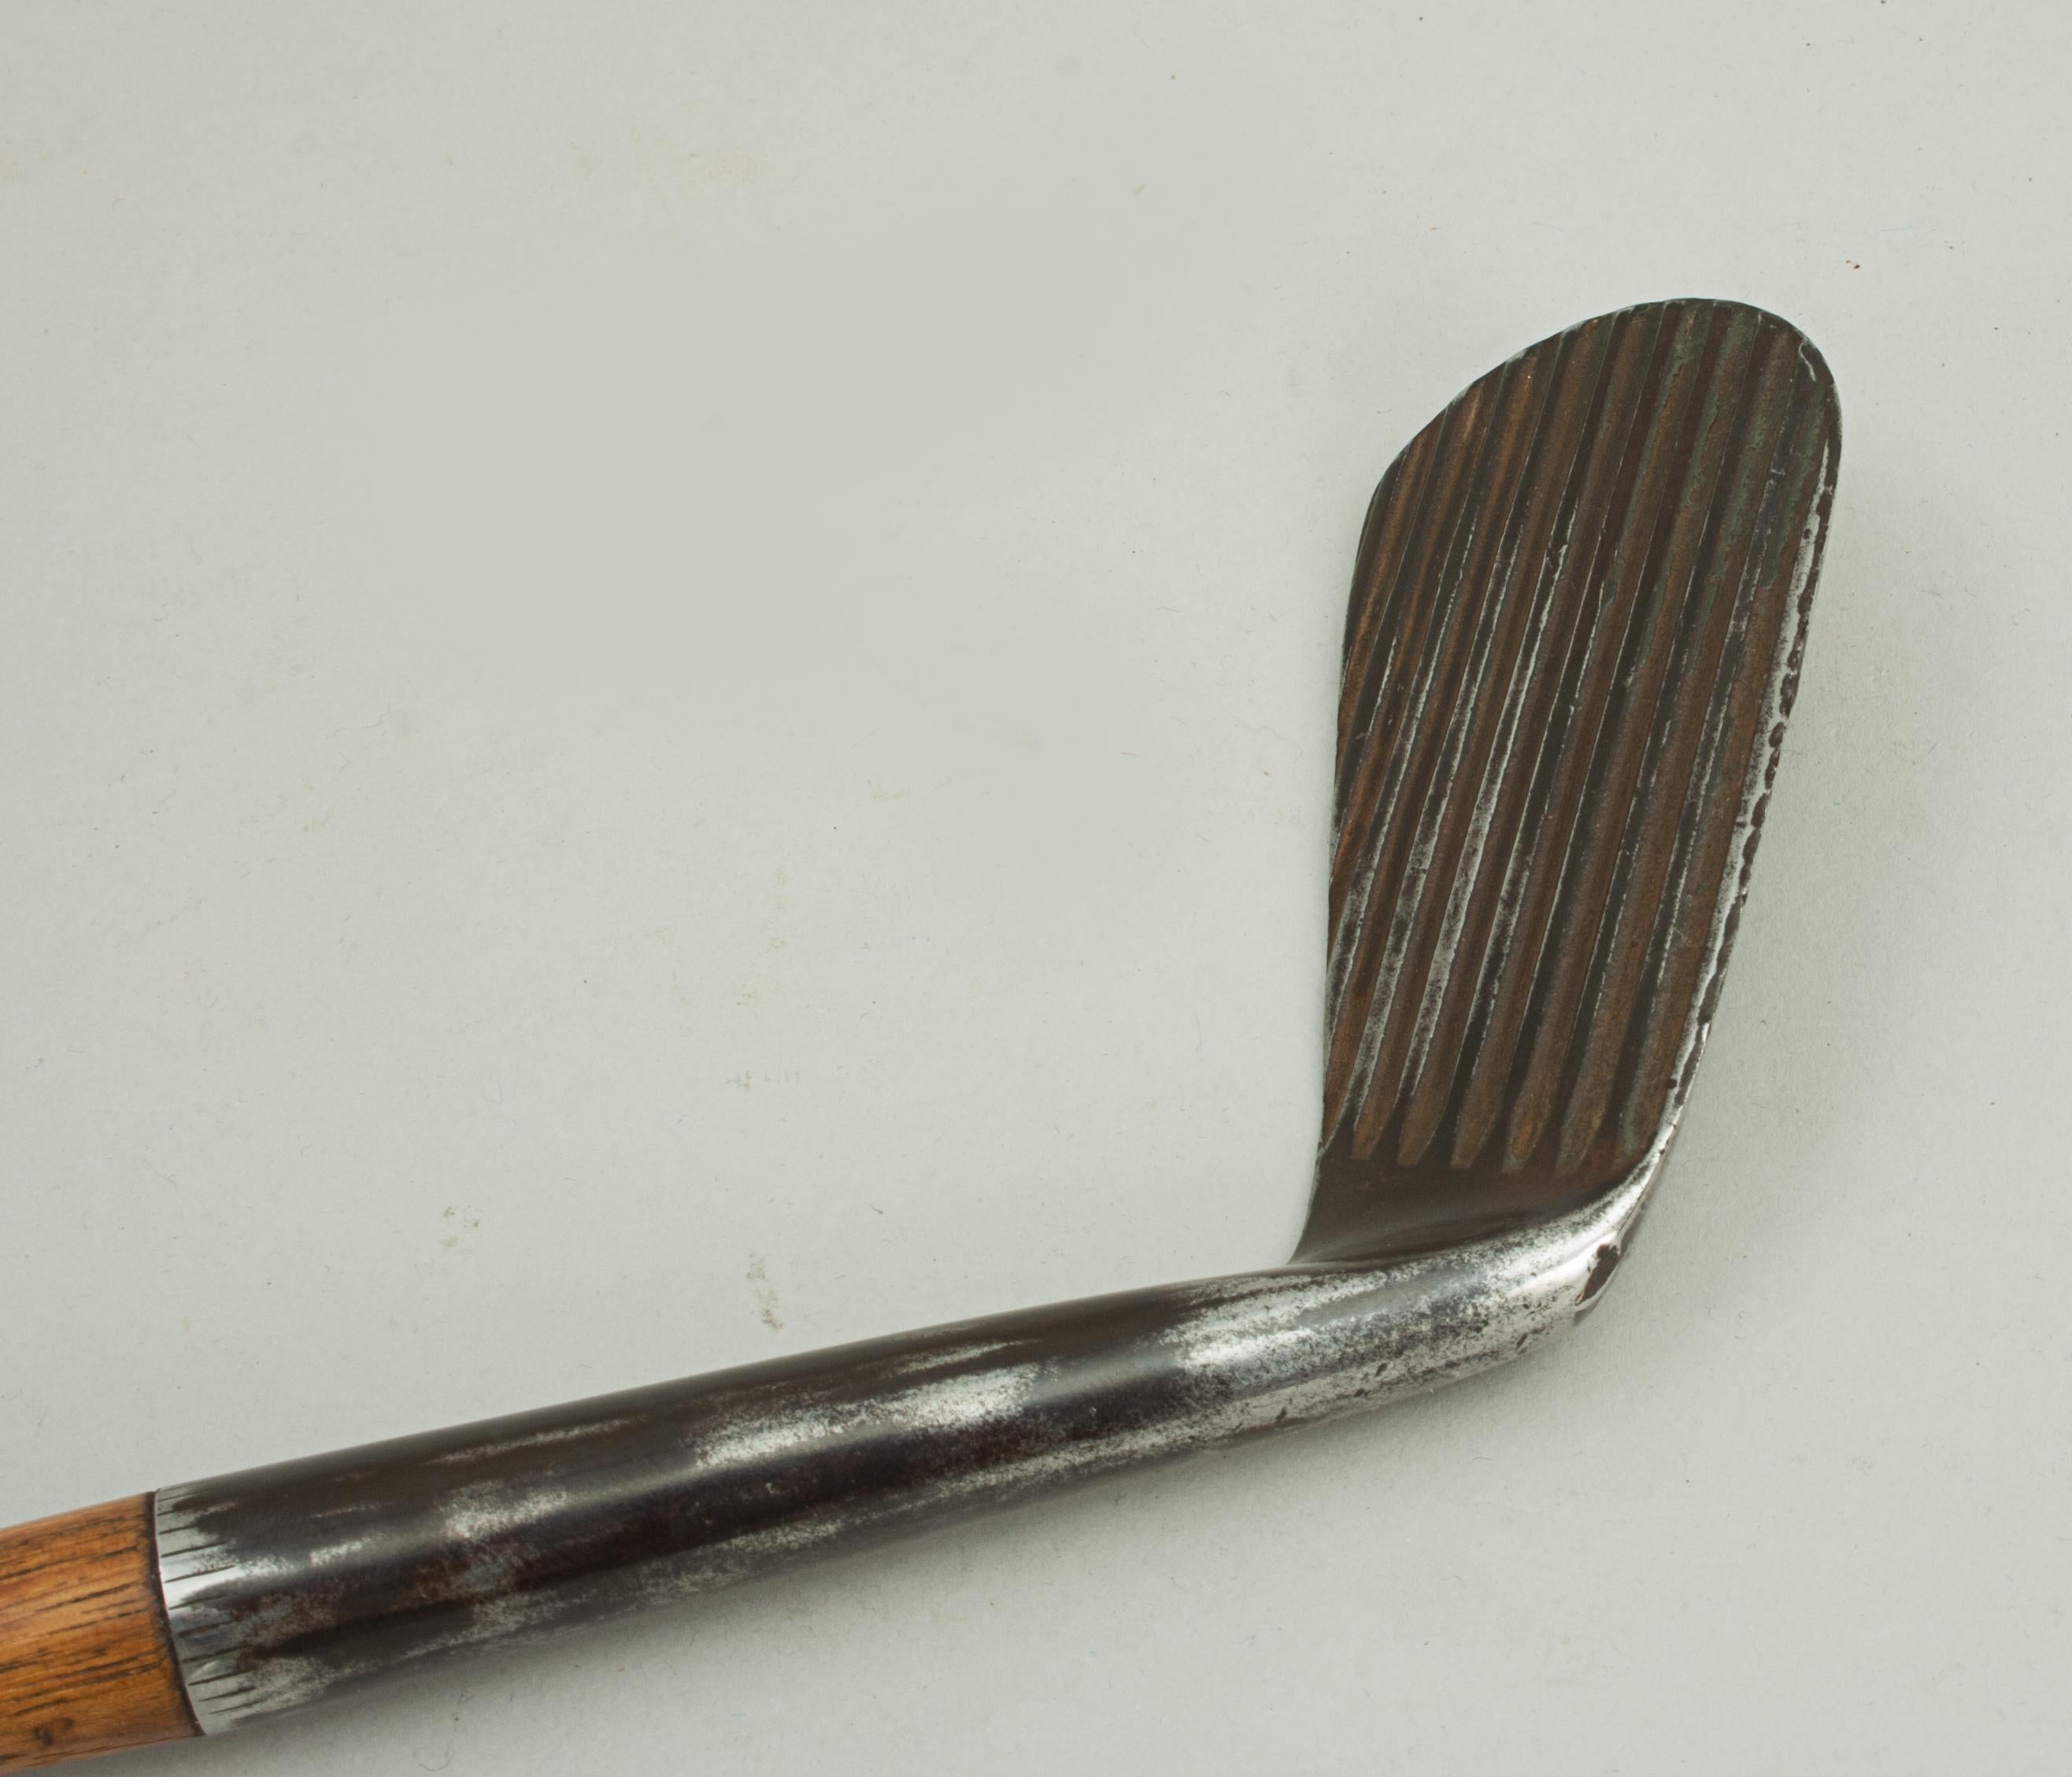 A great left-handed backspin golf club by Hillerich and Bradsby Co. Louisville, Kentucky. Also stamped 'PAR - X - L' and' Hand Made' with logo. There are also the initials H.B and the shaft has the maker's name and place stamp.
A fine collector's